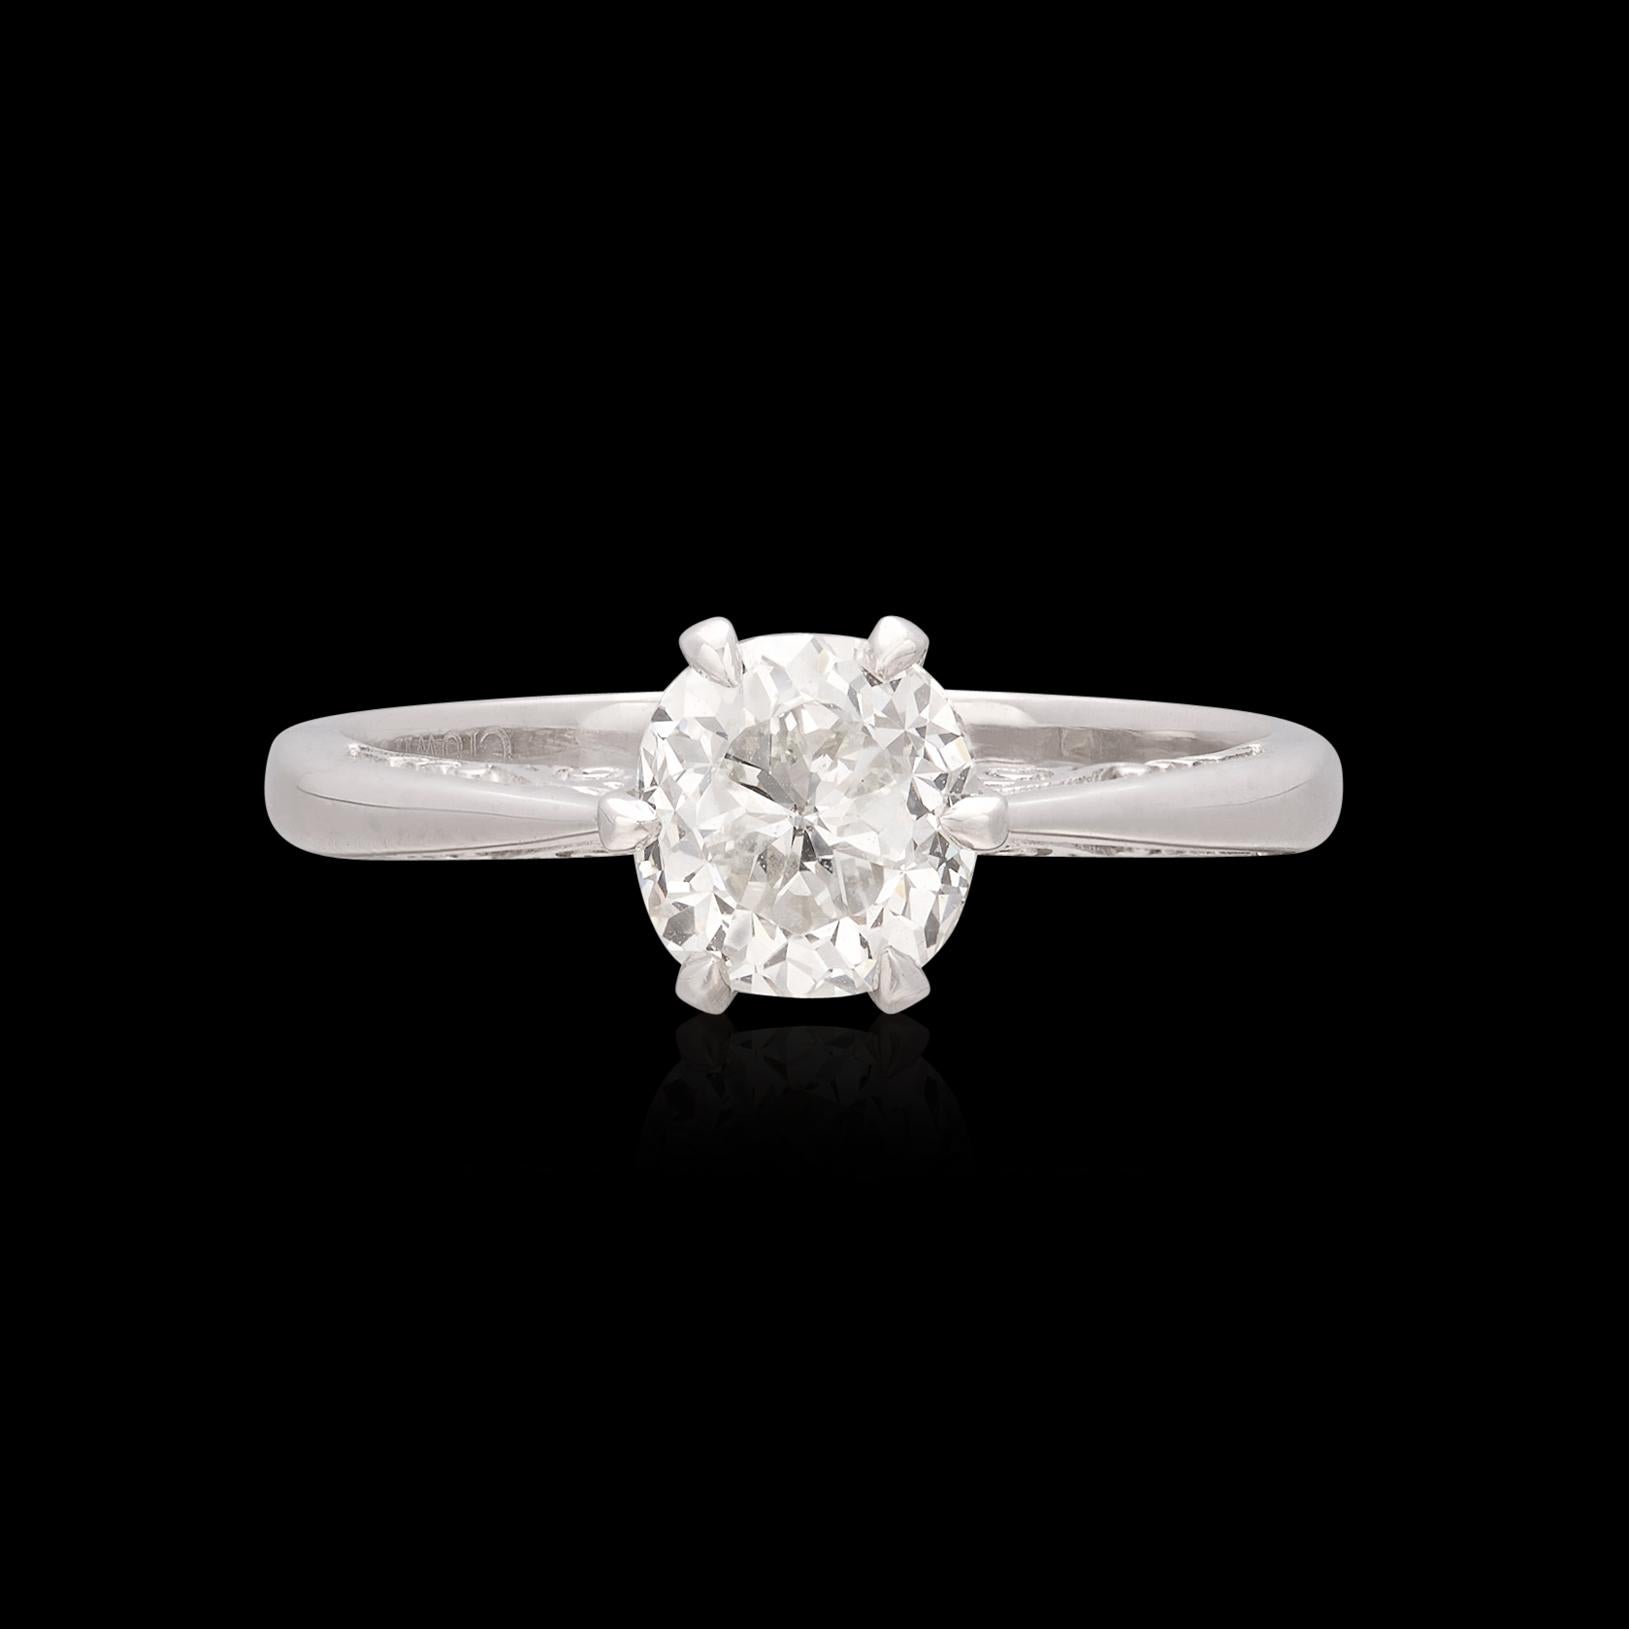 Classic elegance featuring a magnificent center stone. This platinum  tulip inspired ring features an extraordinary 1.33 carat GIA graded diamond as the centerpiece. As rare as it is beautiful, the center stone is a Crown Jubilee, a GIA recognized